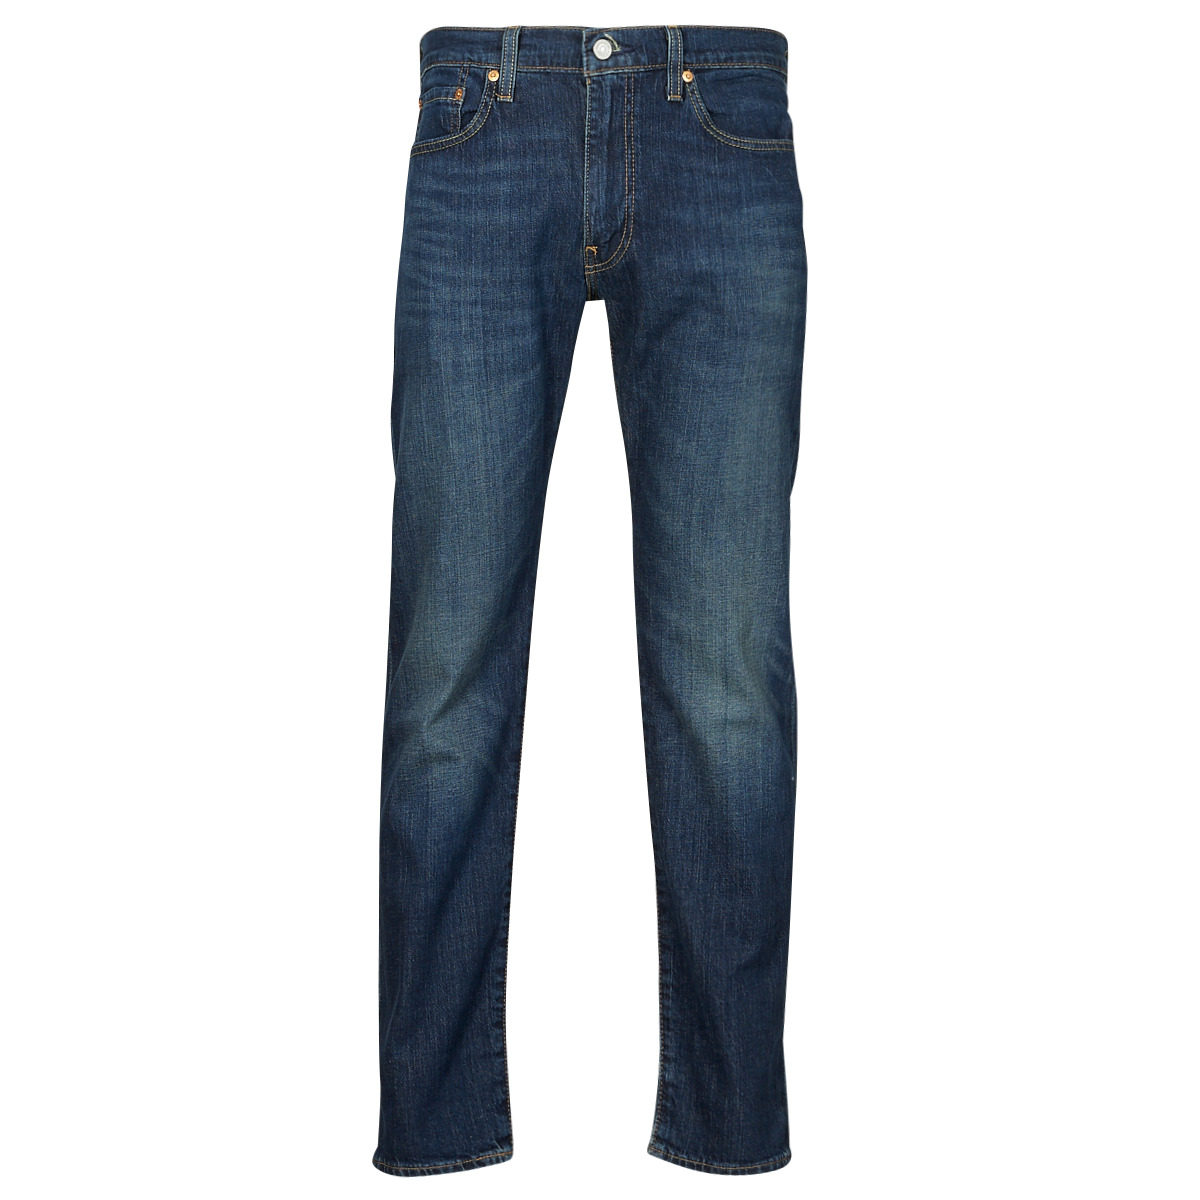 Jeans tapered / στενά τζην Levis 502 TAPER